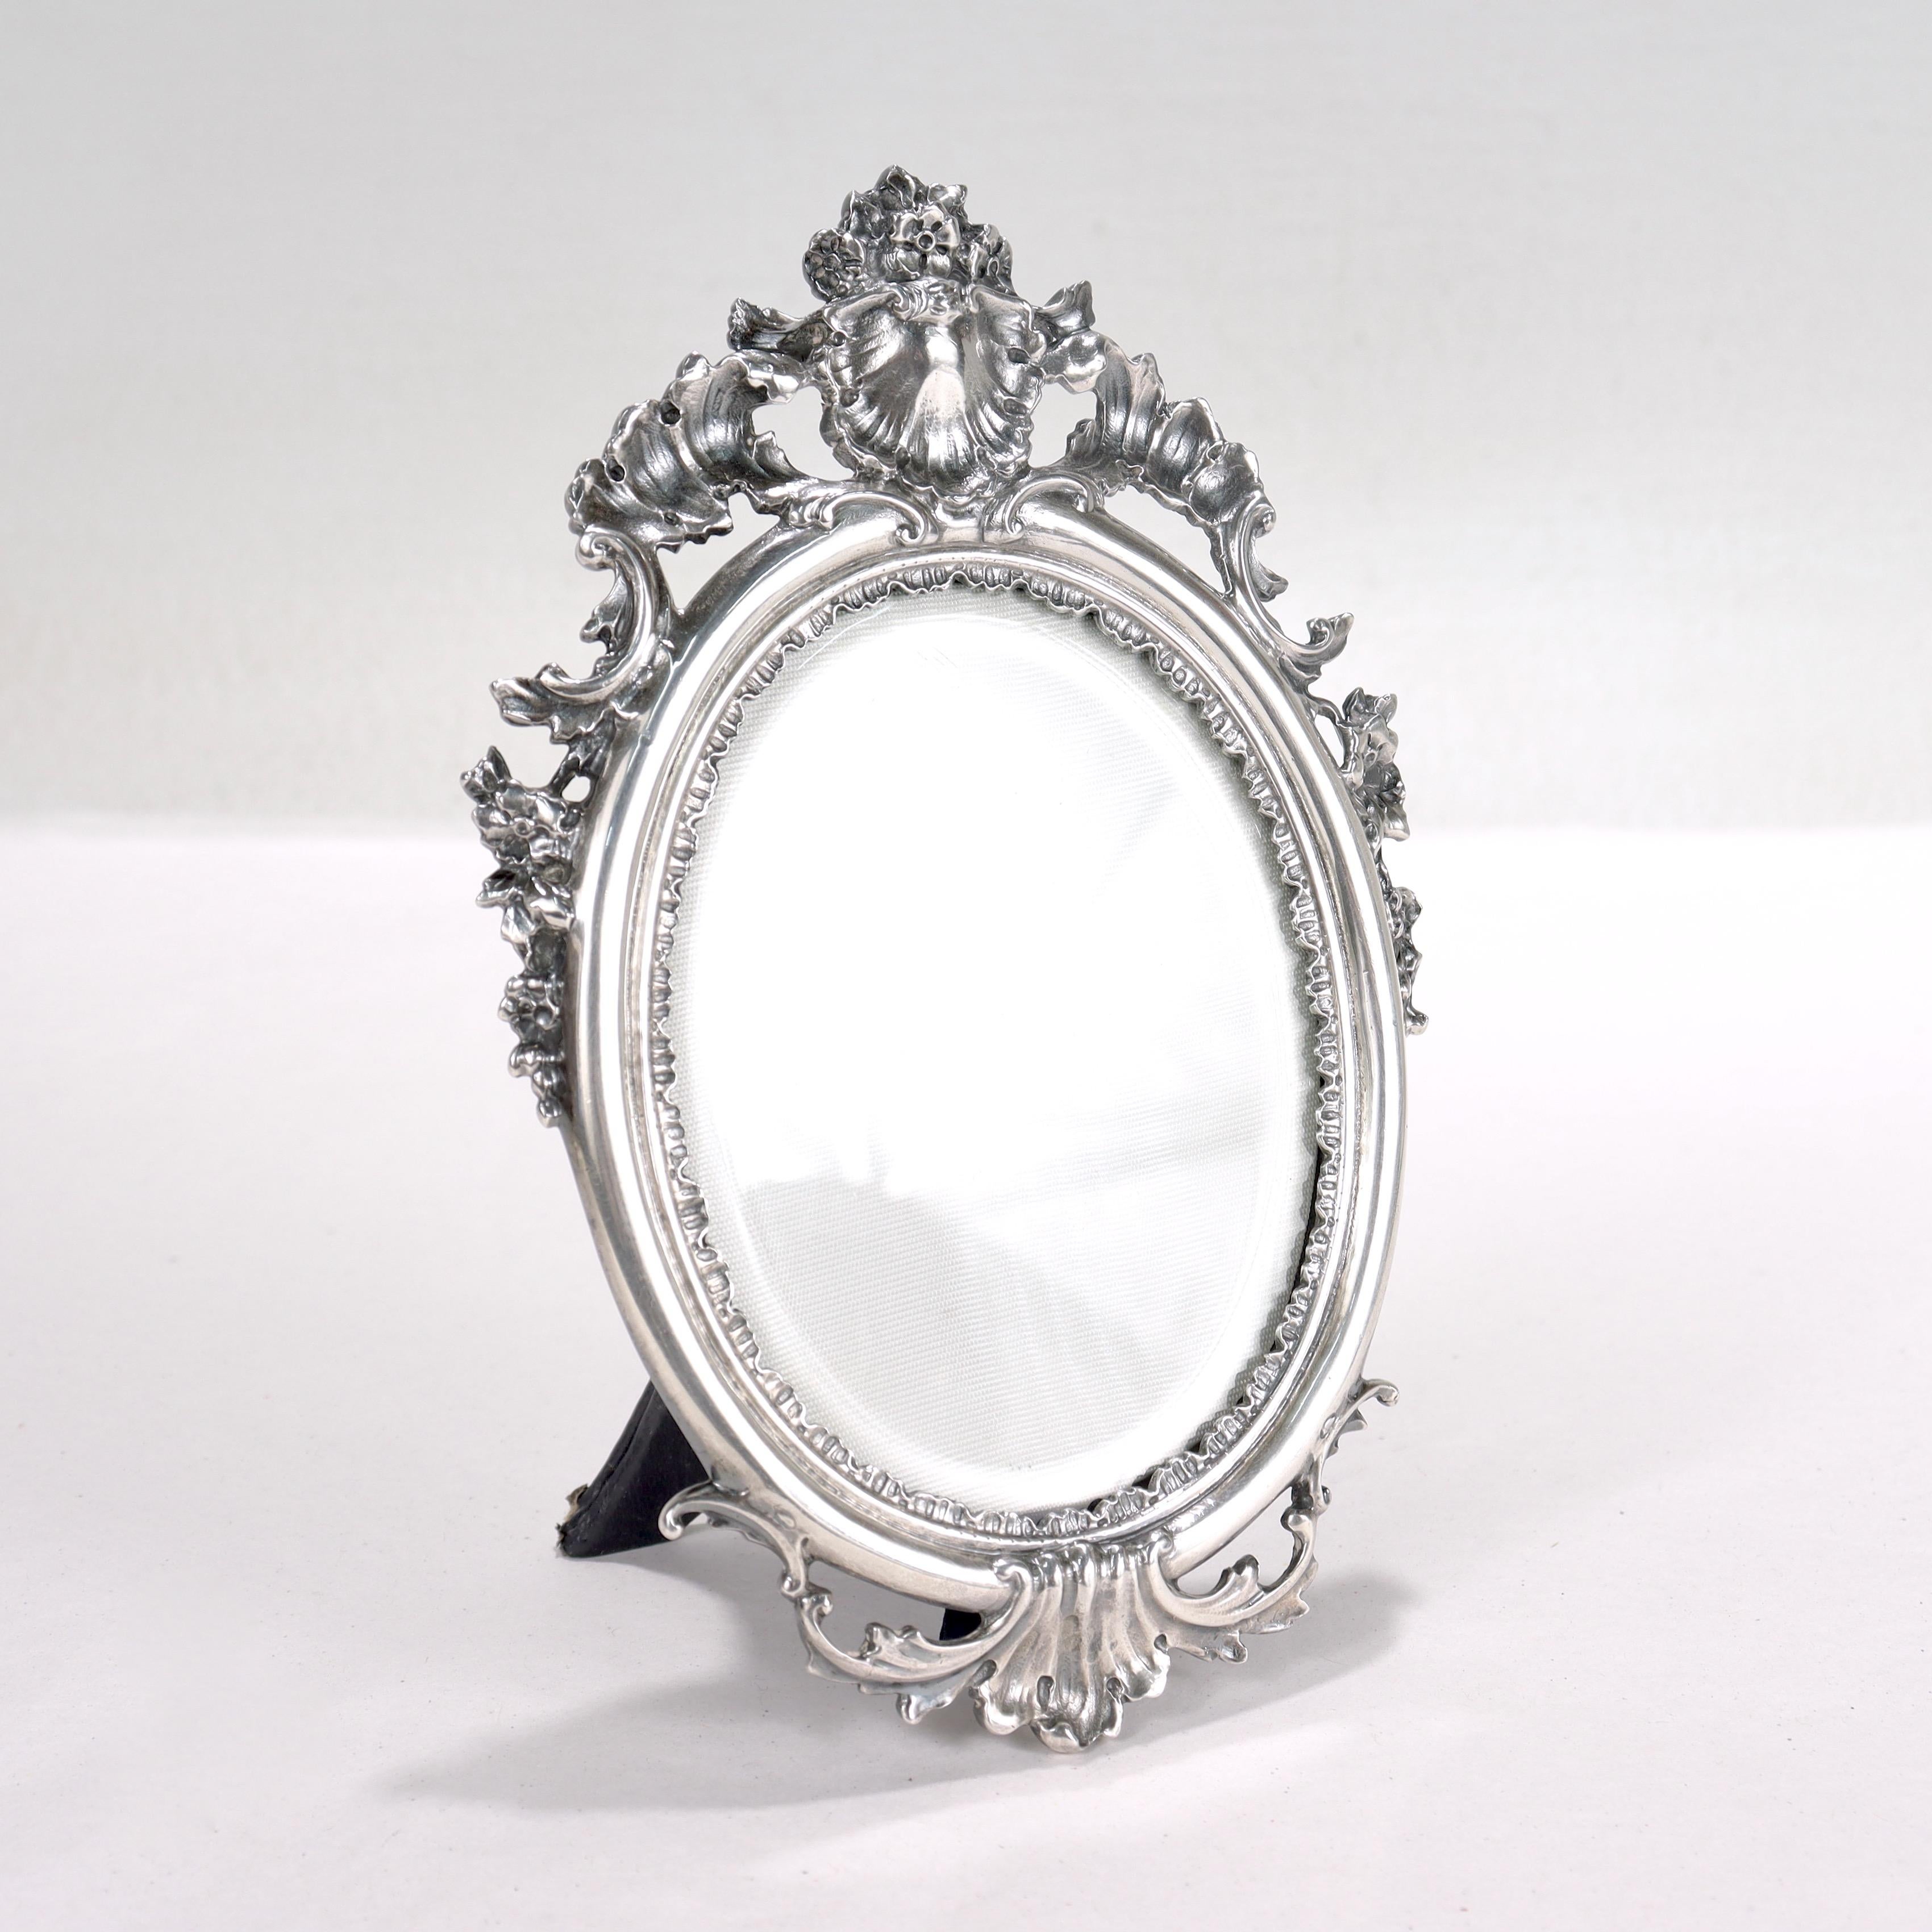 A fine silver oval, easel back picture frame.

By Buccellati.

In sterling silver. 

With heavy gauge Rococo style rocaille decoration to the top and base. 

Marked Buccellati / Italy / Sterling to the side of the frame.

Simply a great Buccellati